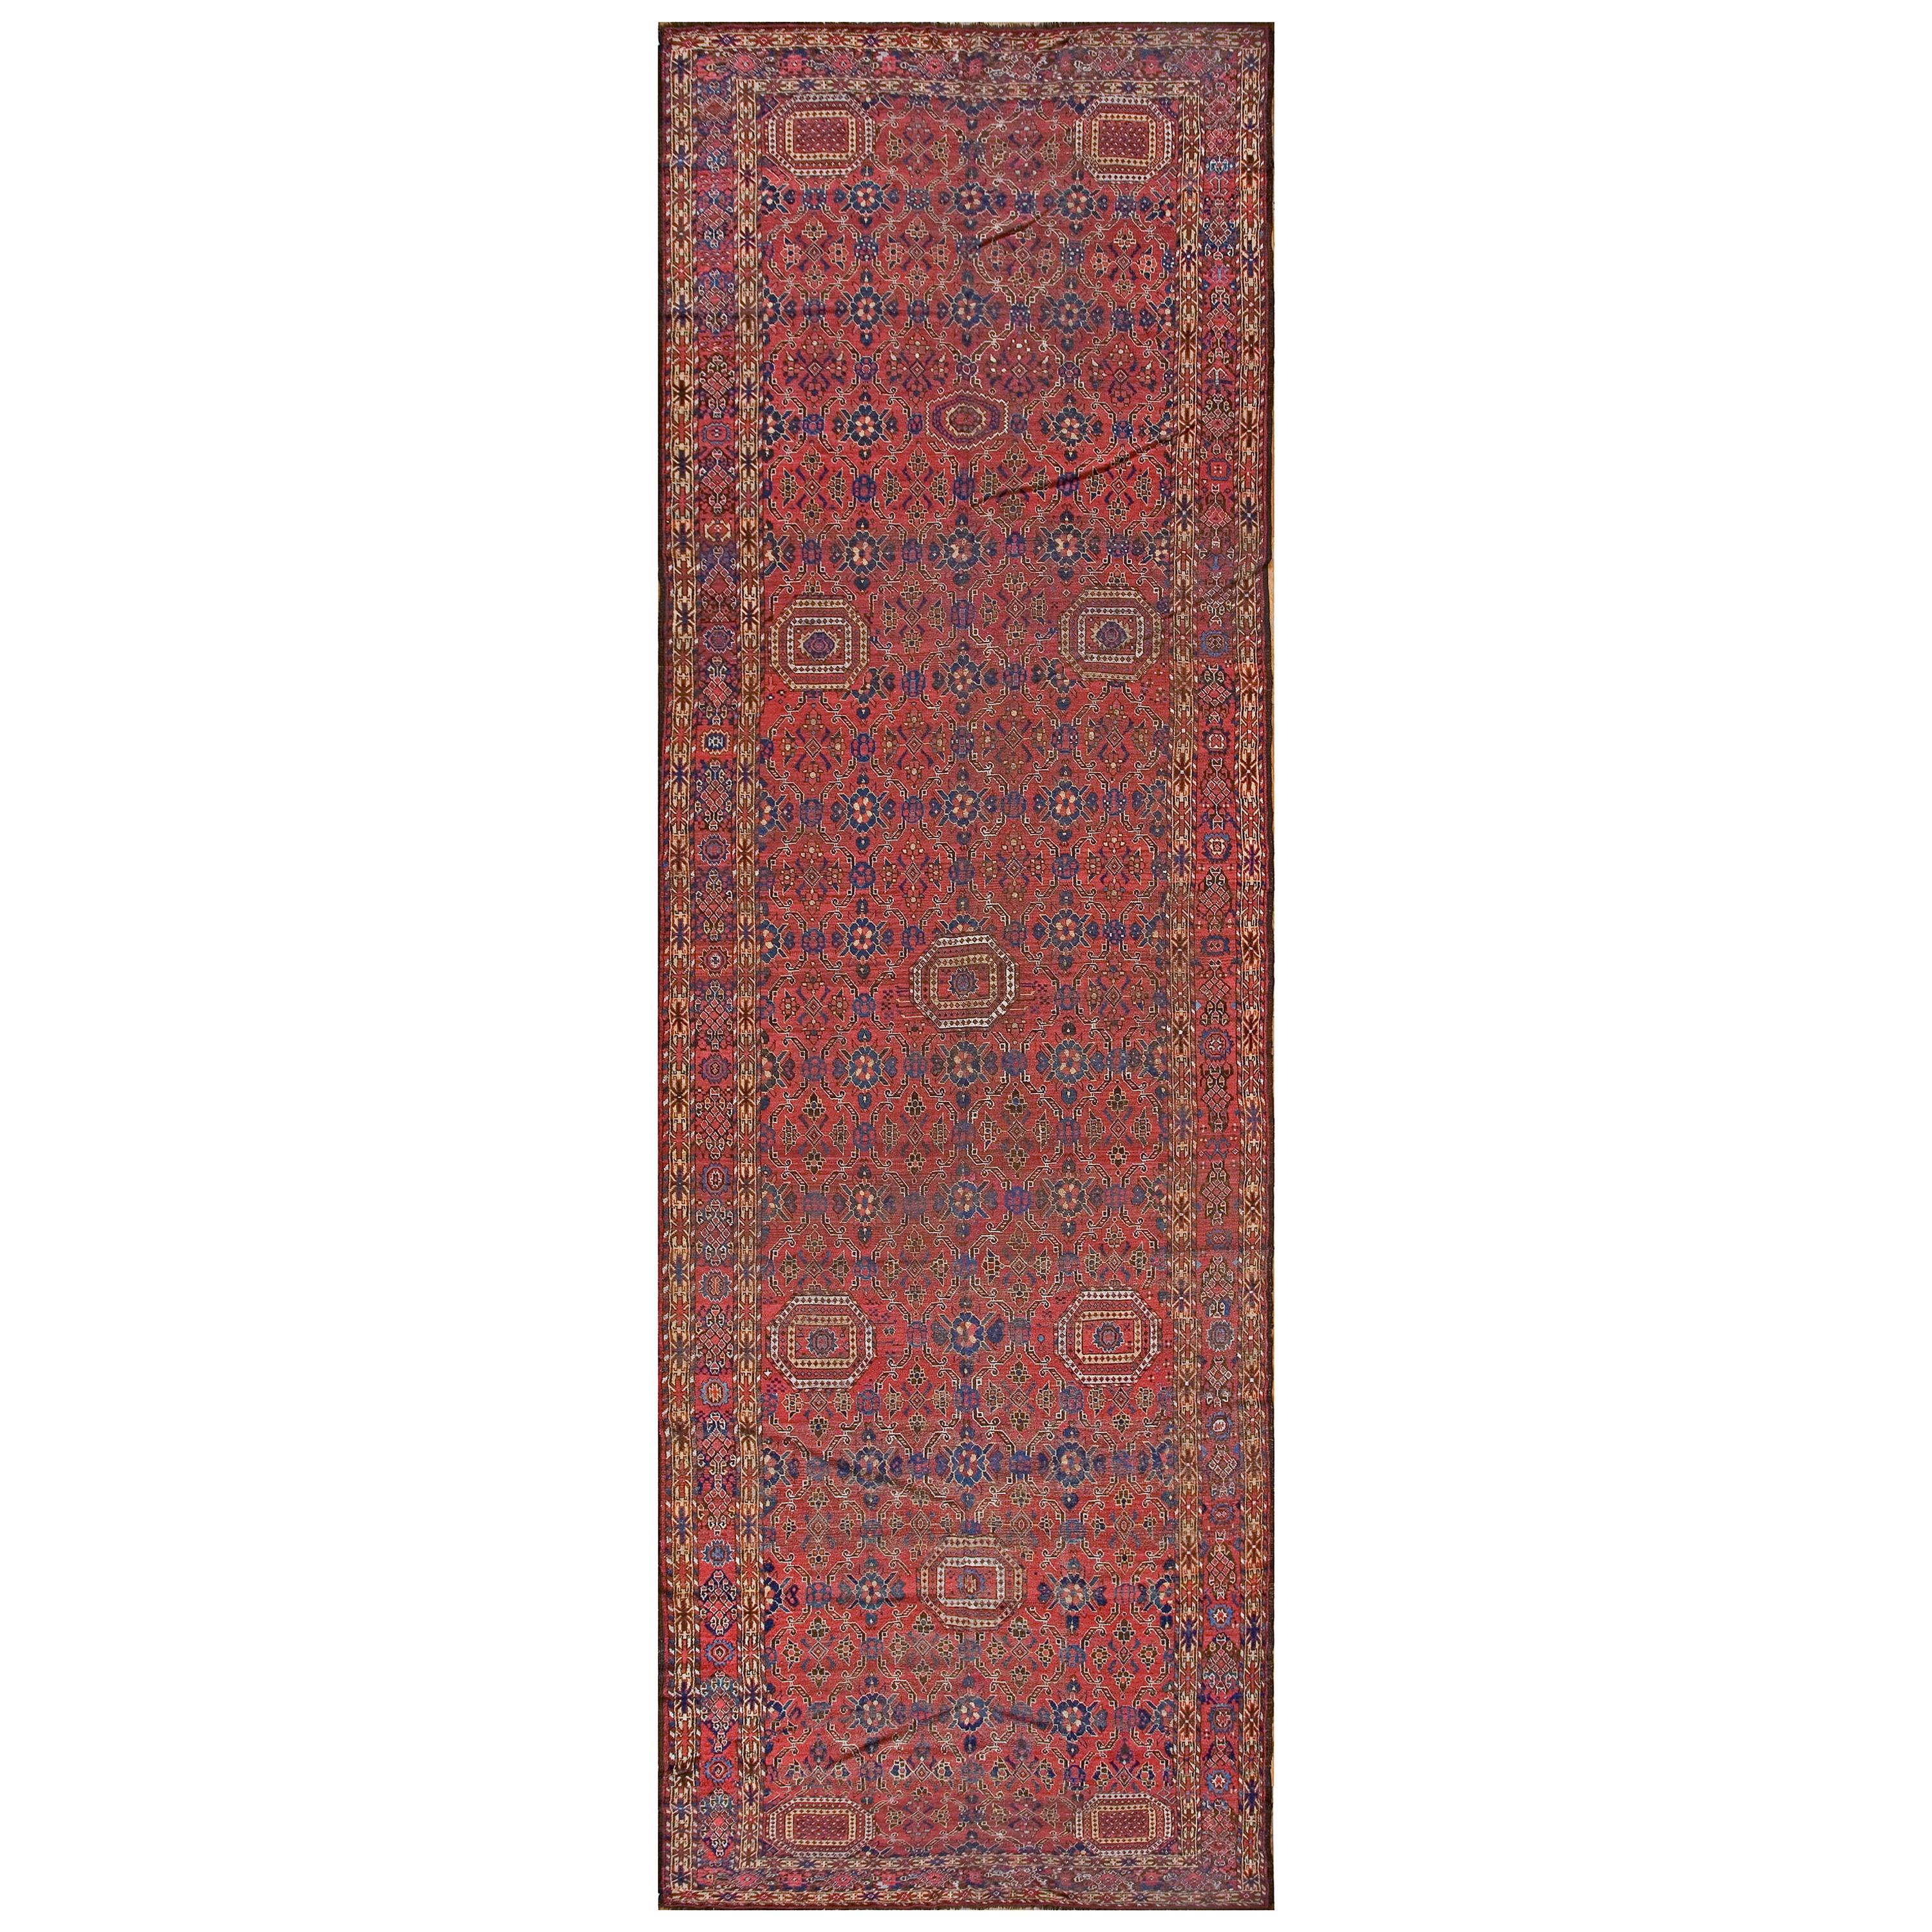 Mid-19th Century Central Asian Beshir Gallery Carpet ( 6'7" x 21'4" -201 x 650 ) For Sale